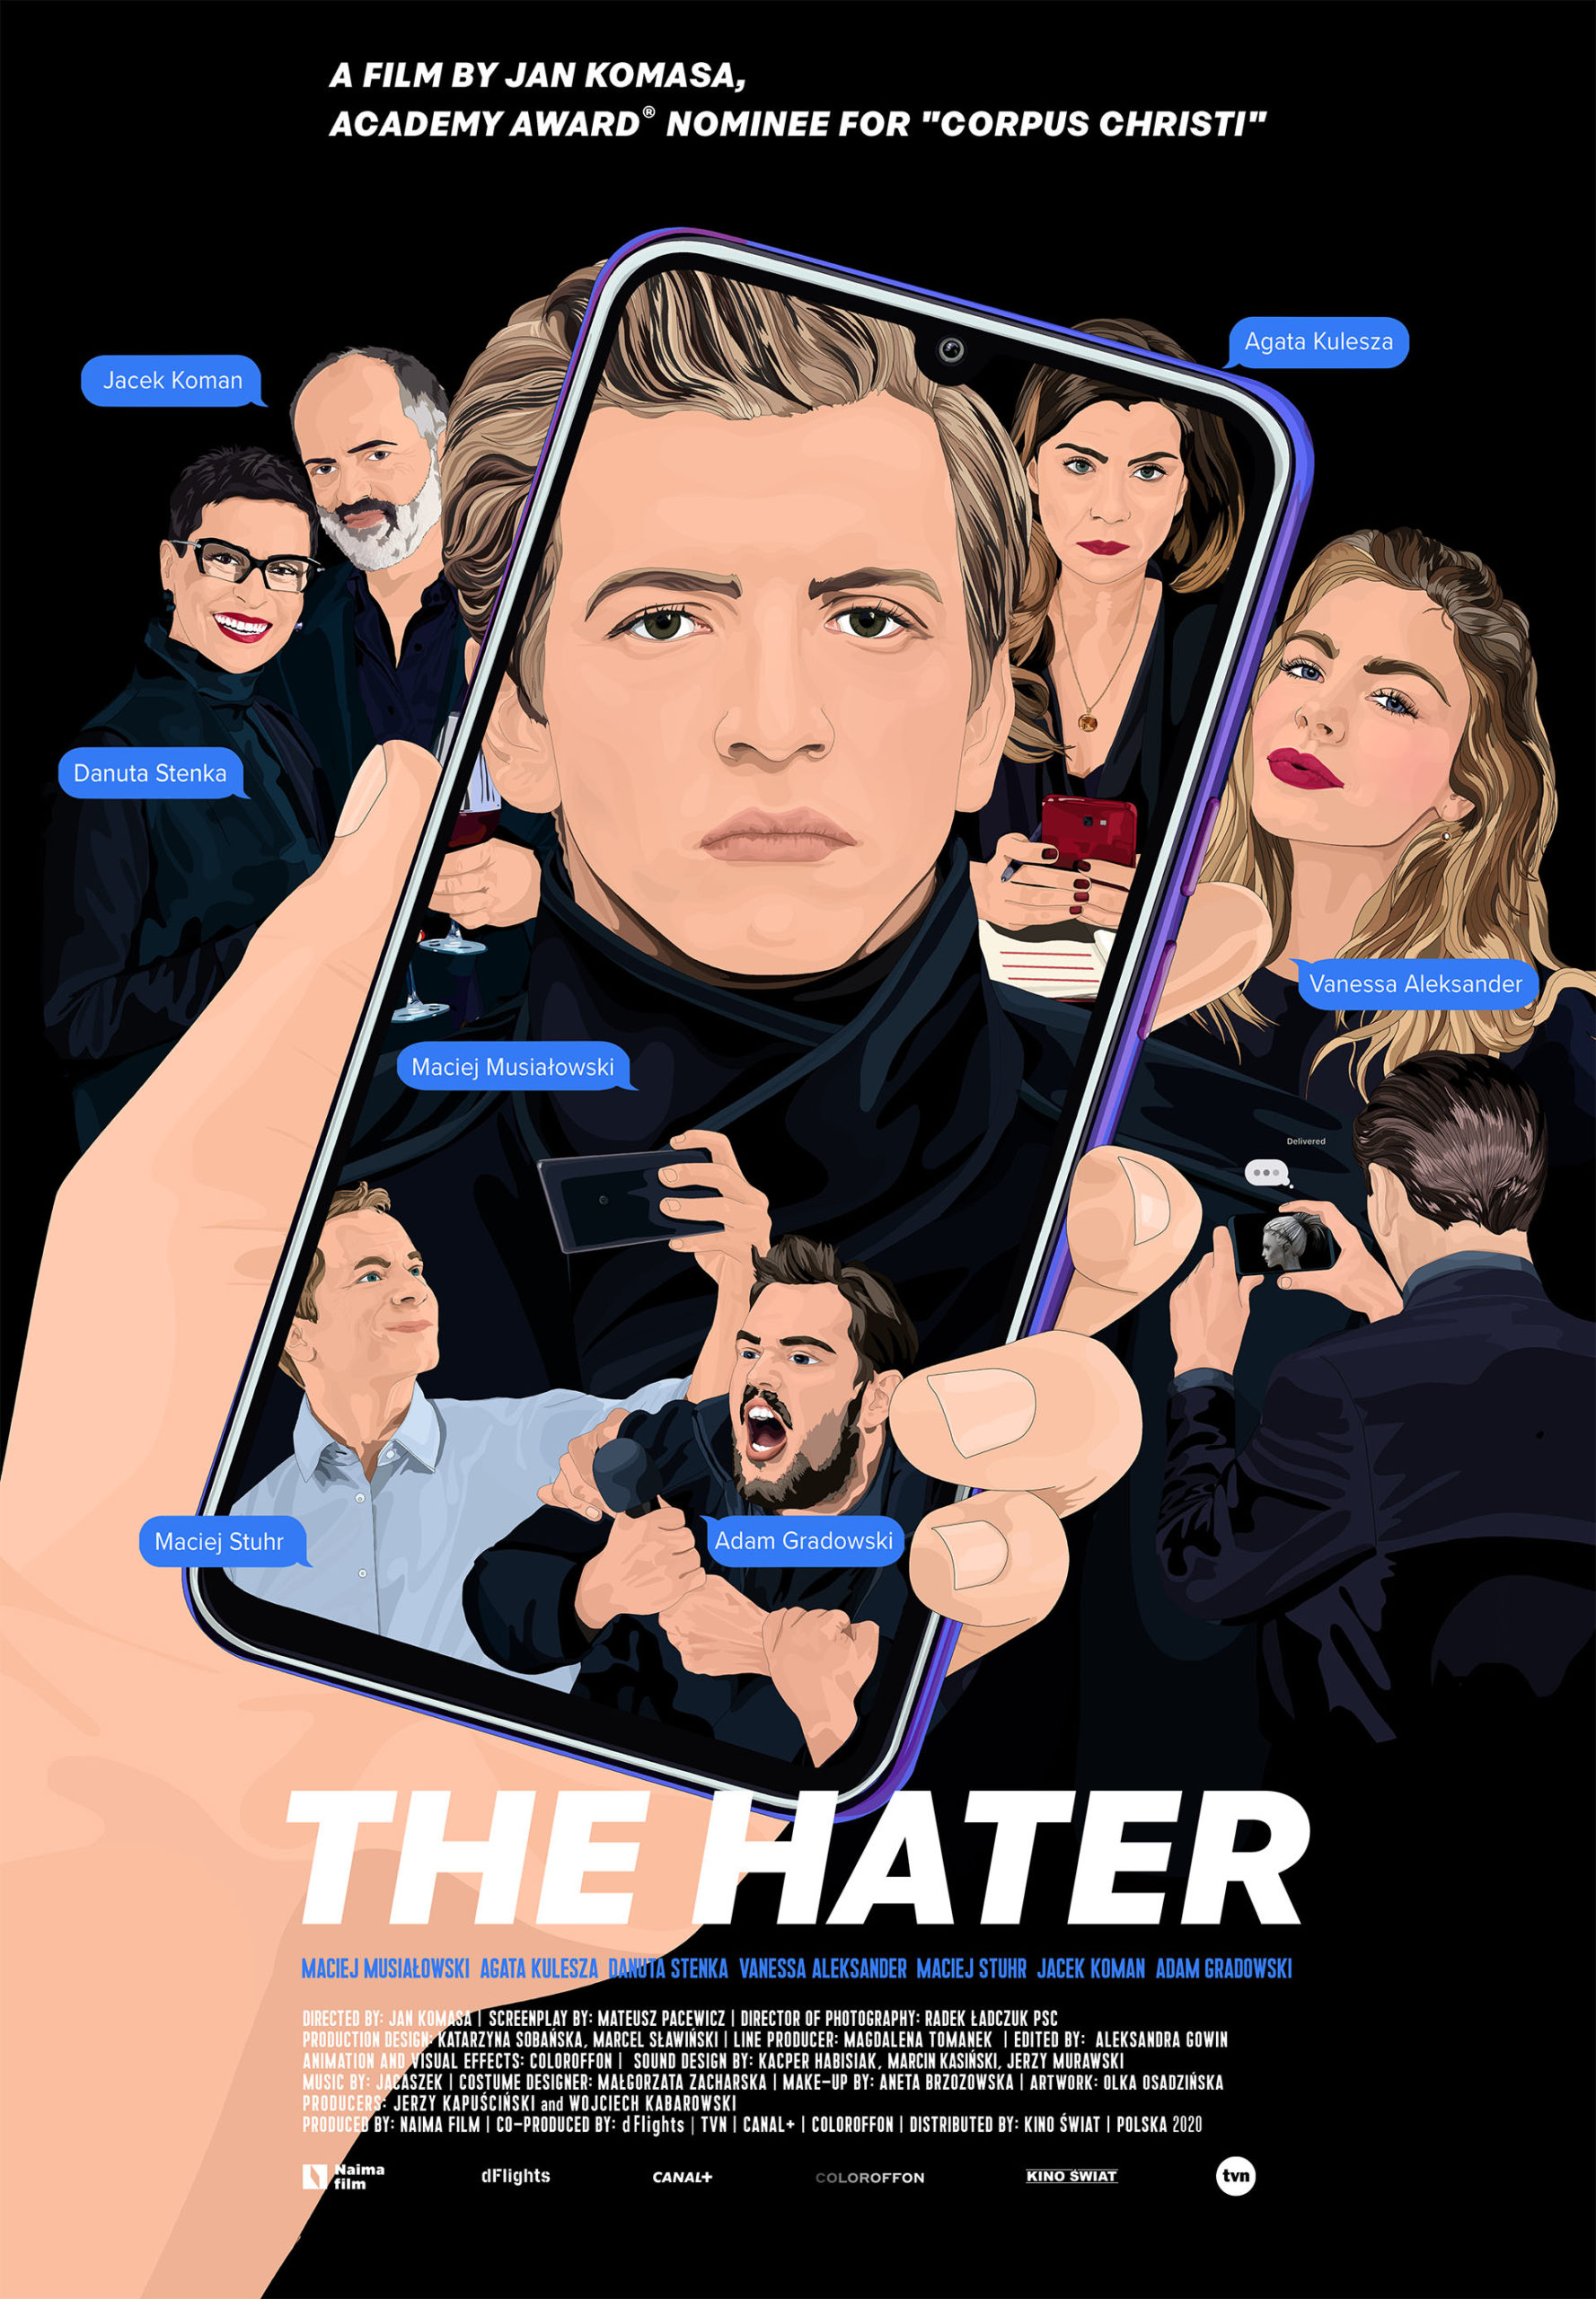 The Hater (2020) & other works by Jan Komasa